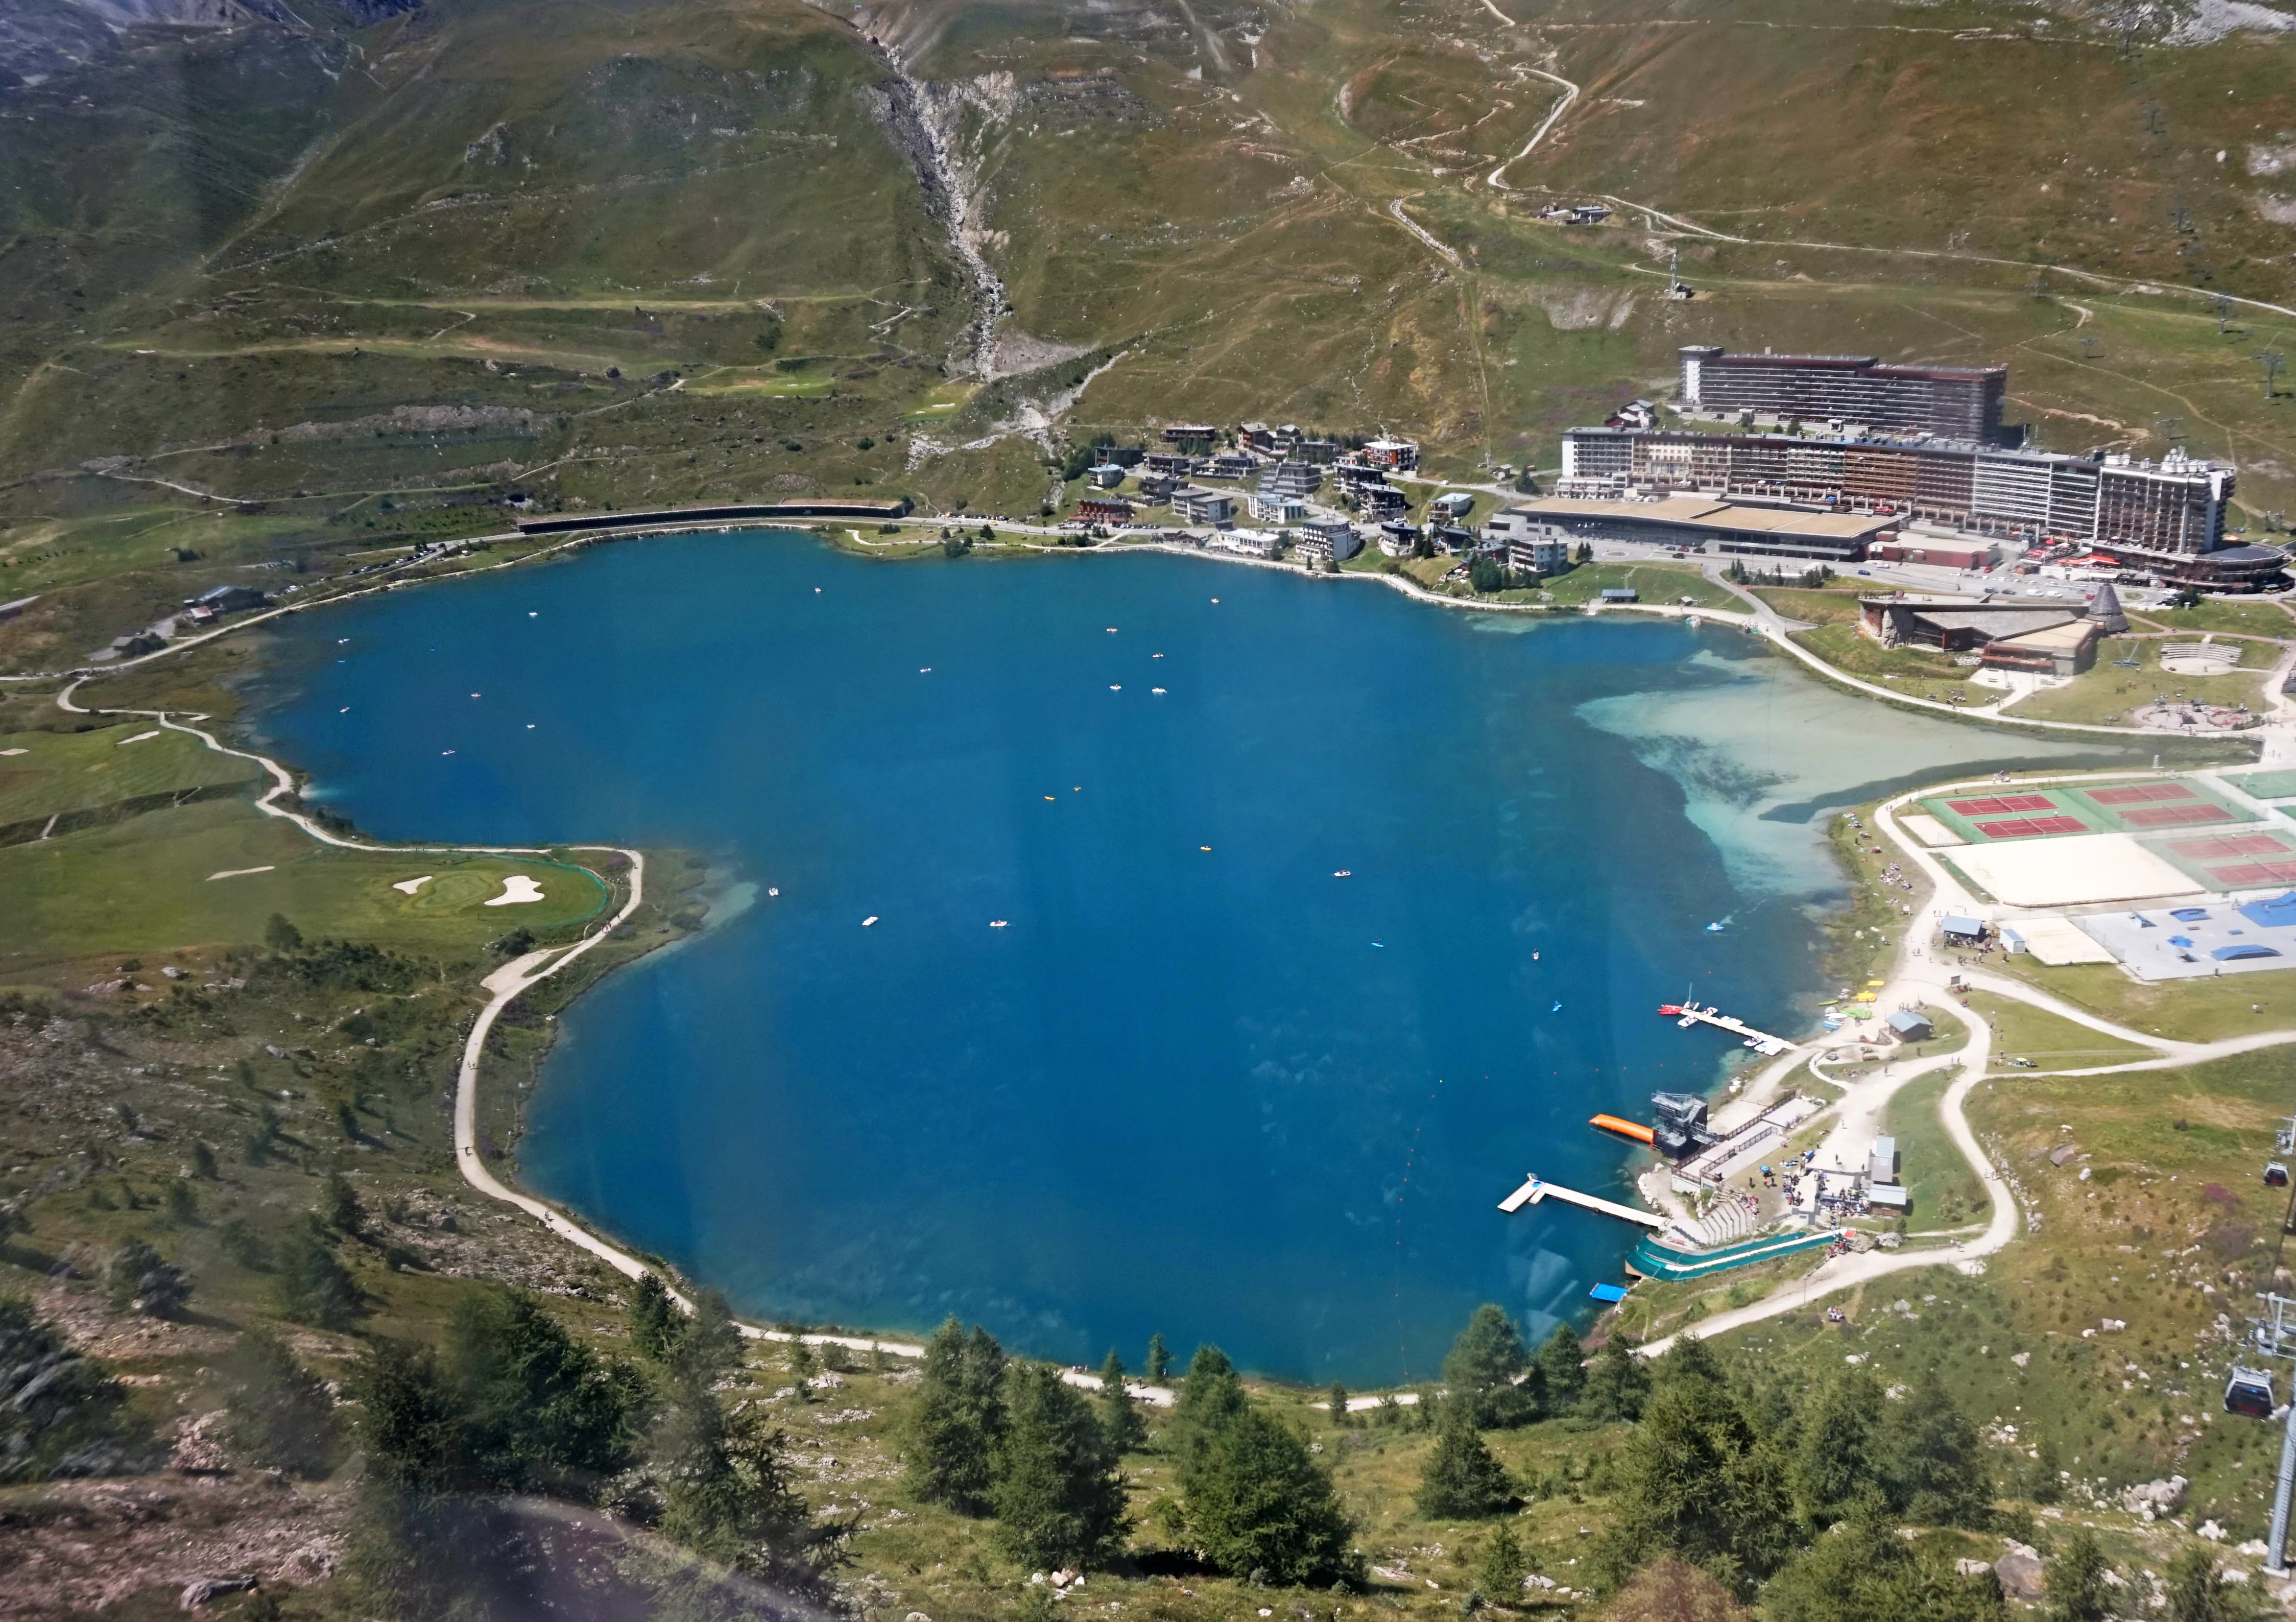 Lac de Tignes in France, Europe | Lakes - Rated 0.9